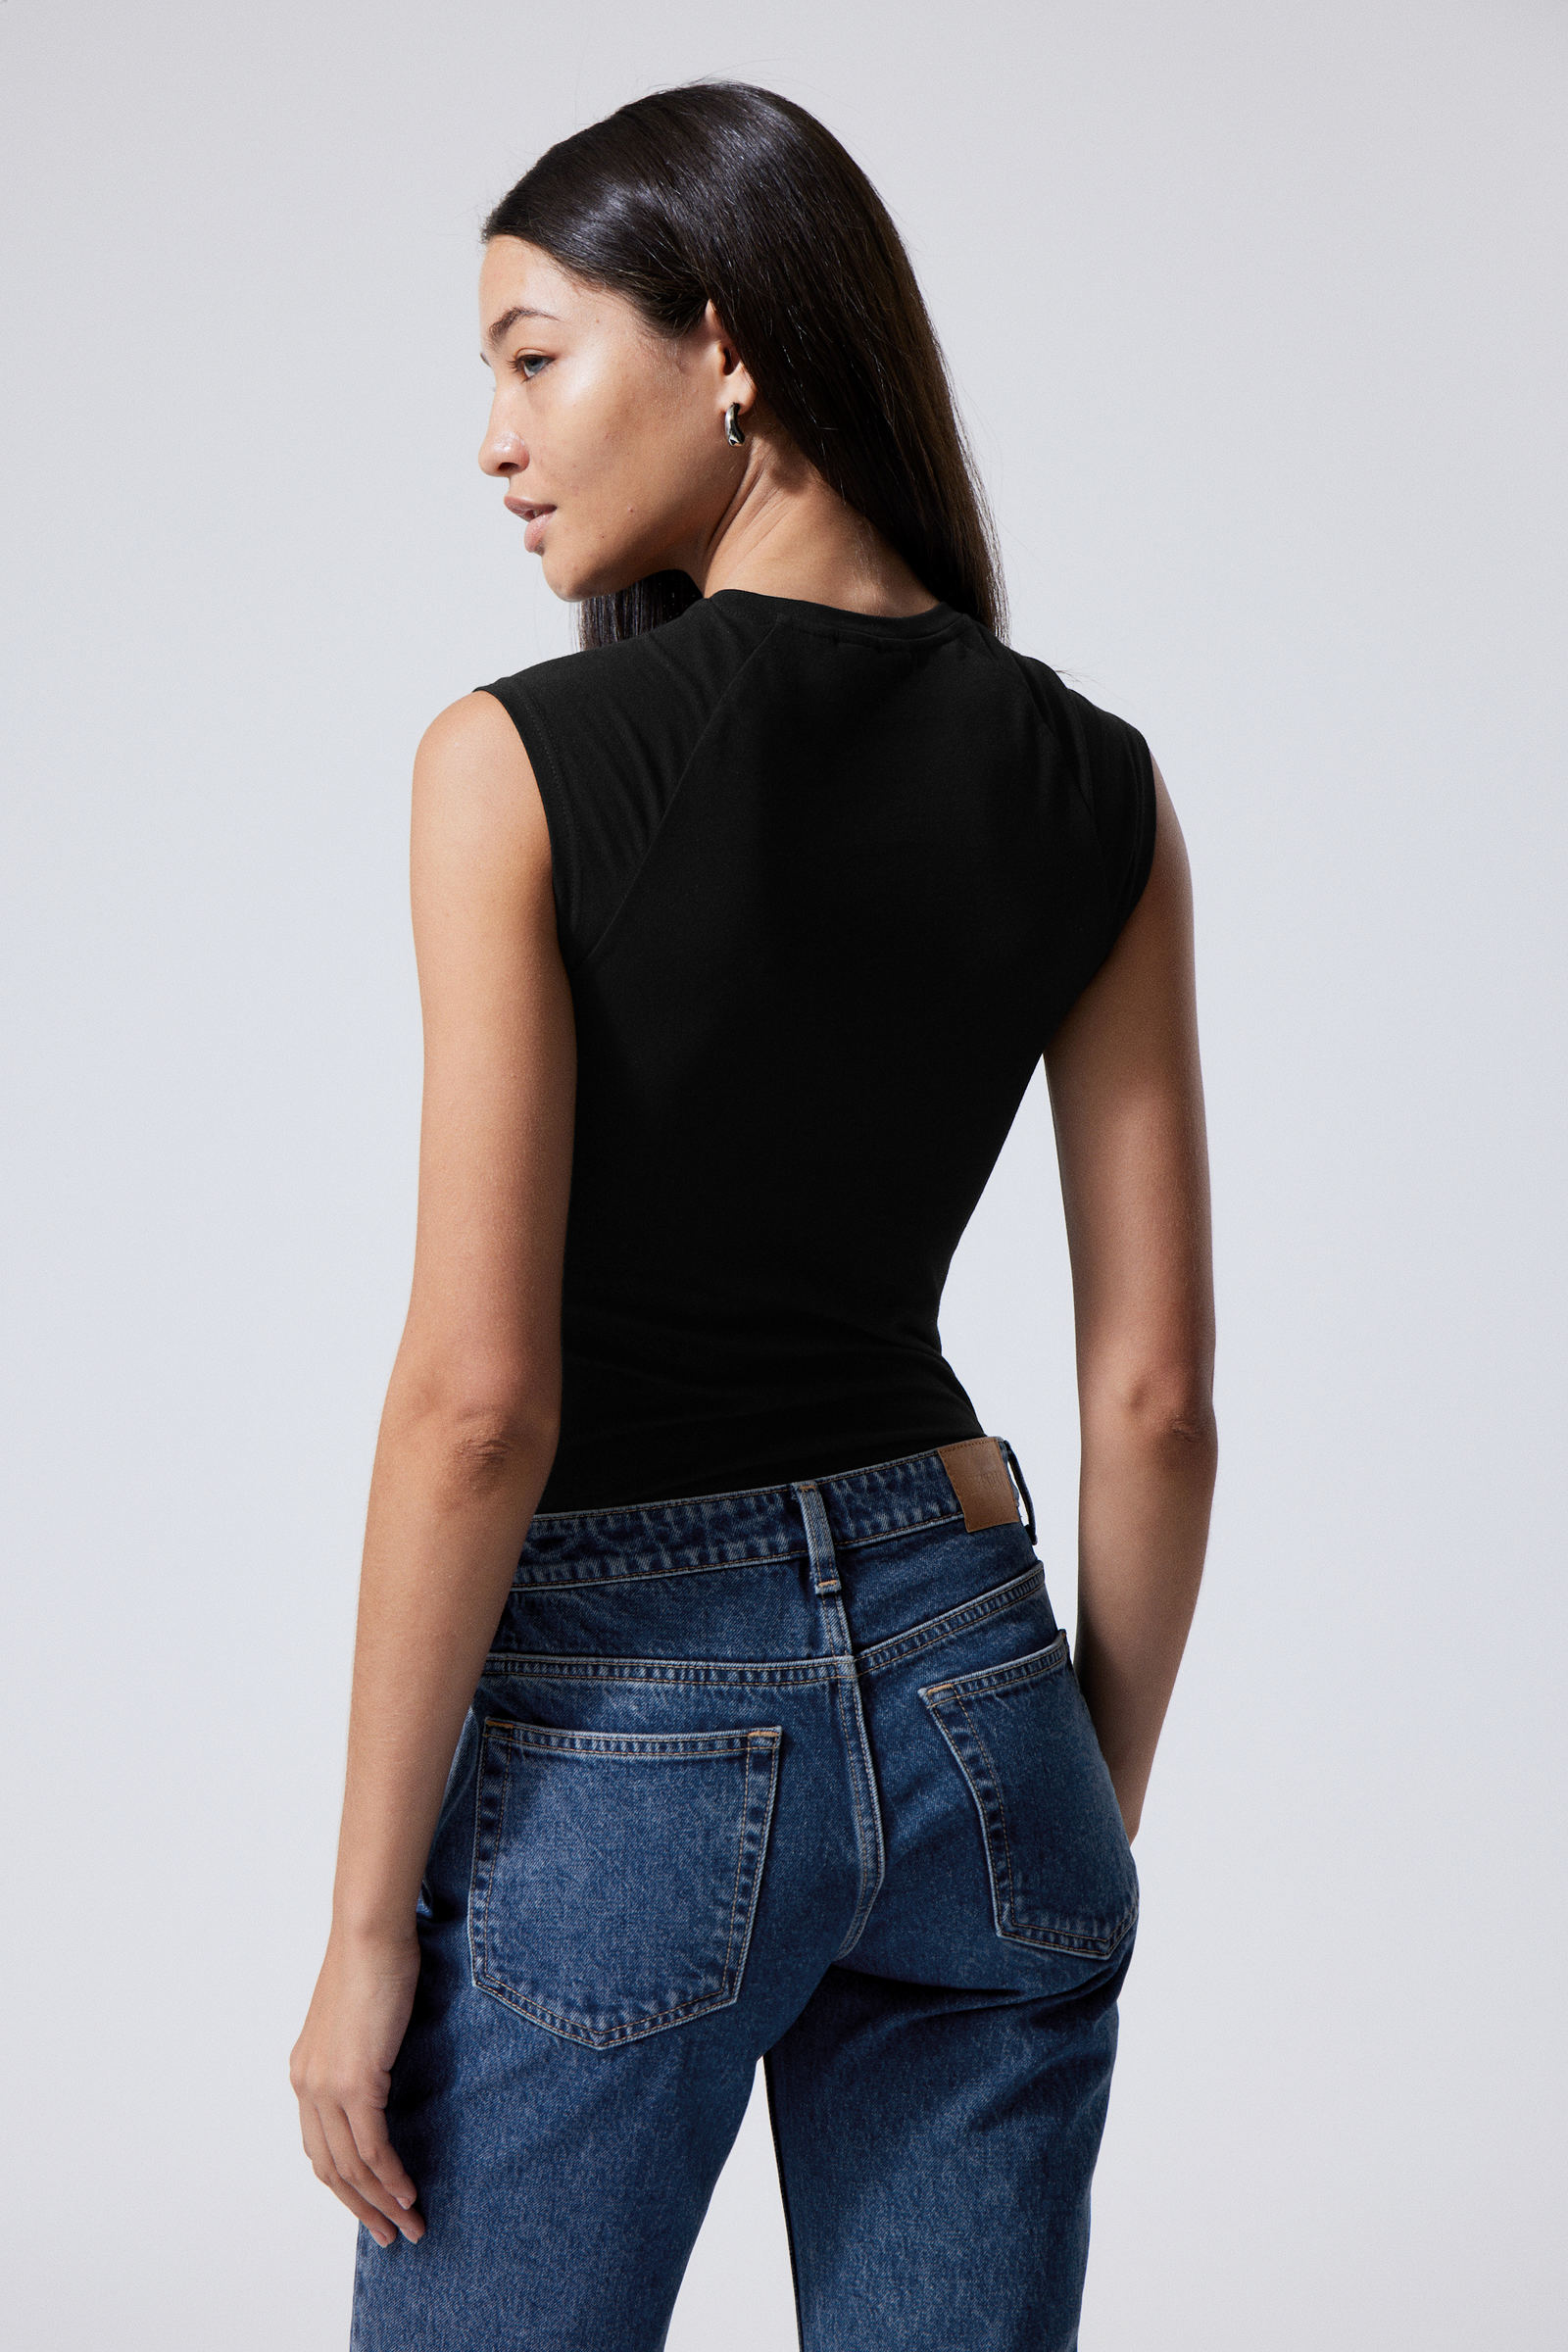 Weekday Alina faux leather fitted tank top in black